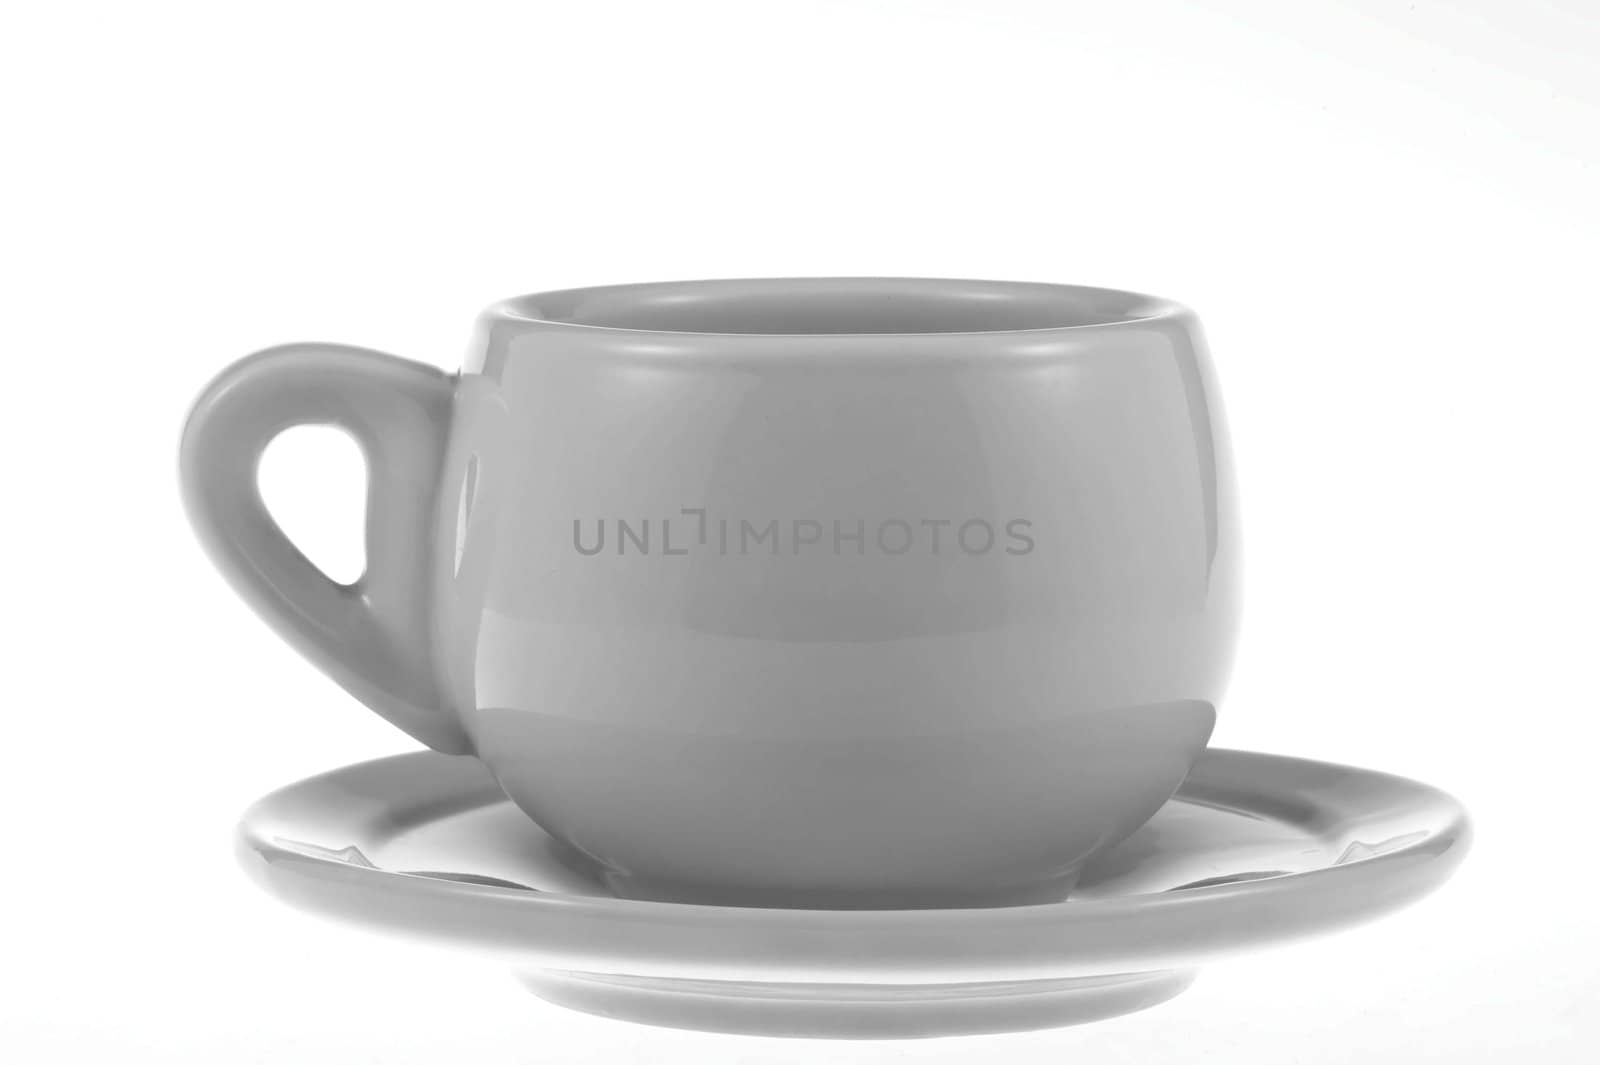 White porcelain cup and saucer on a white background